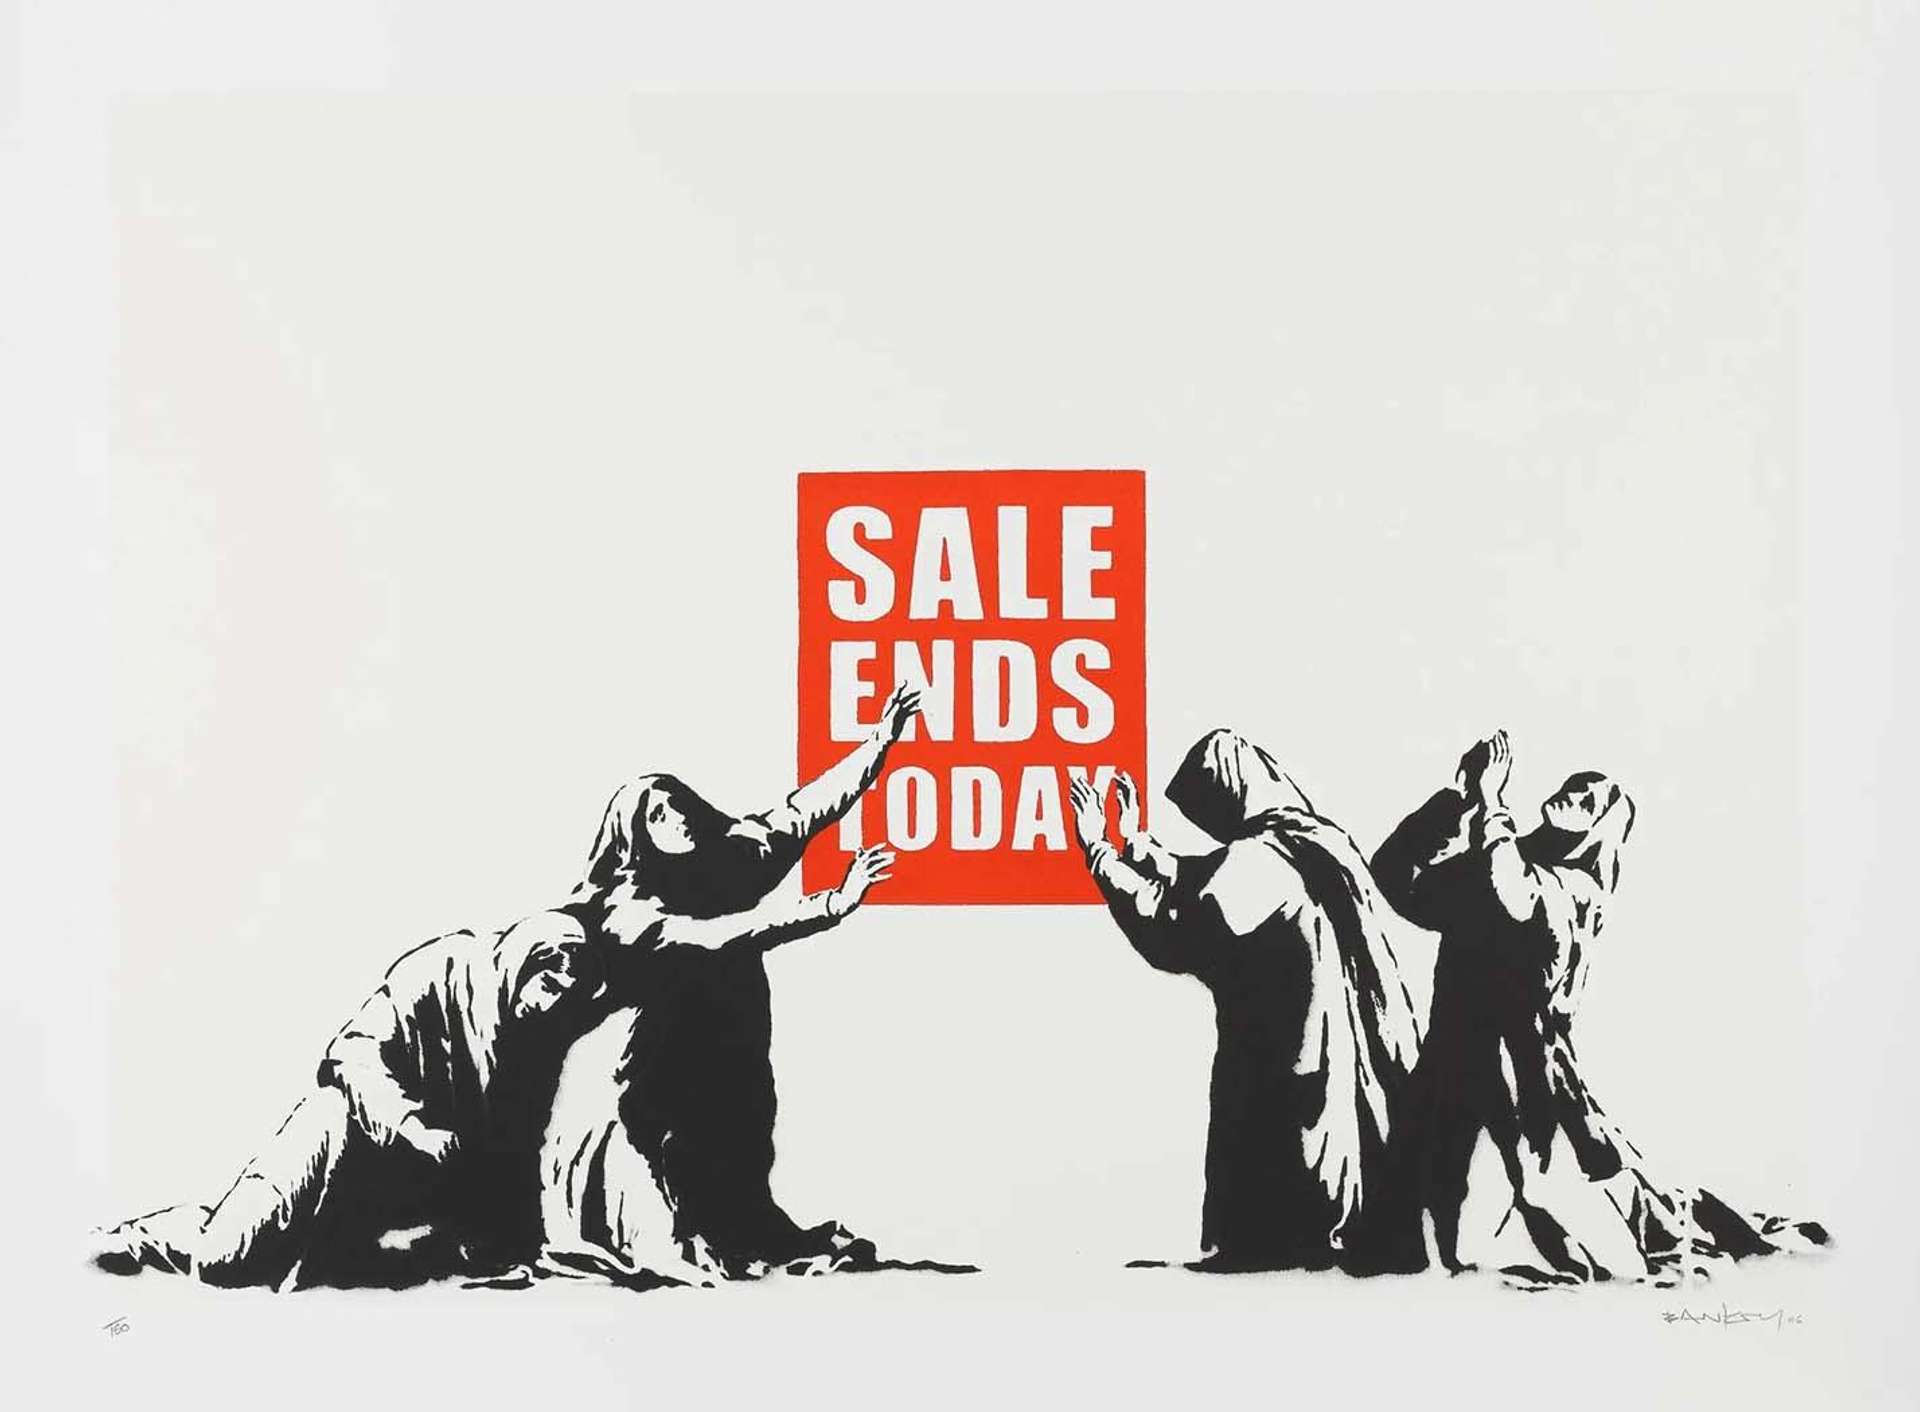 Four figures mimicking a Lamentation of Christ painting, with a red "SALE ENDS TODAY" sign replacing Jesus.